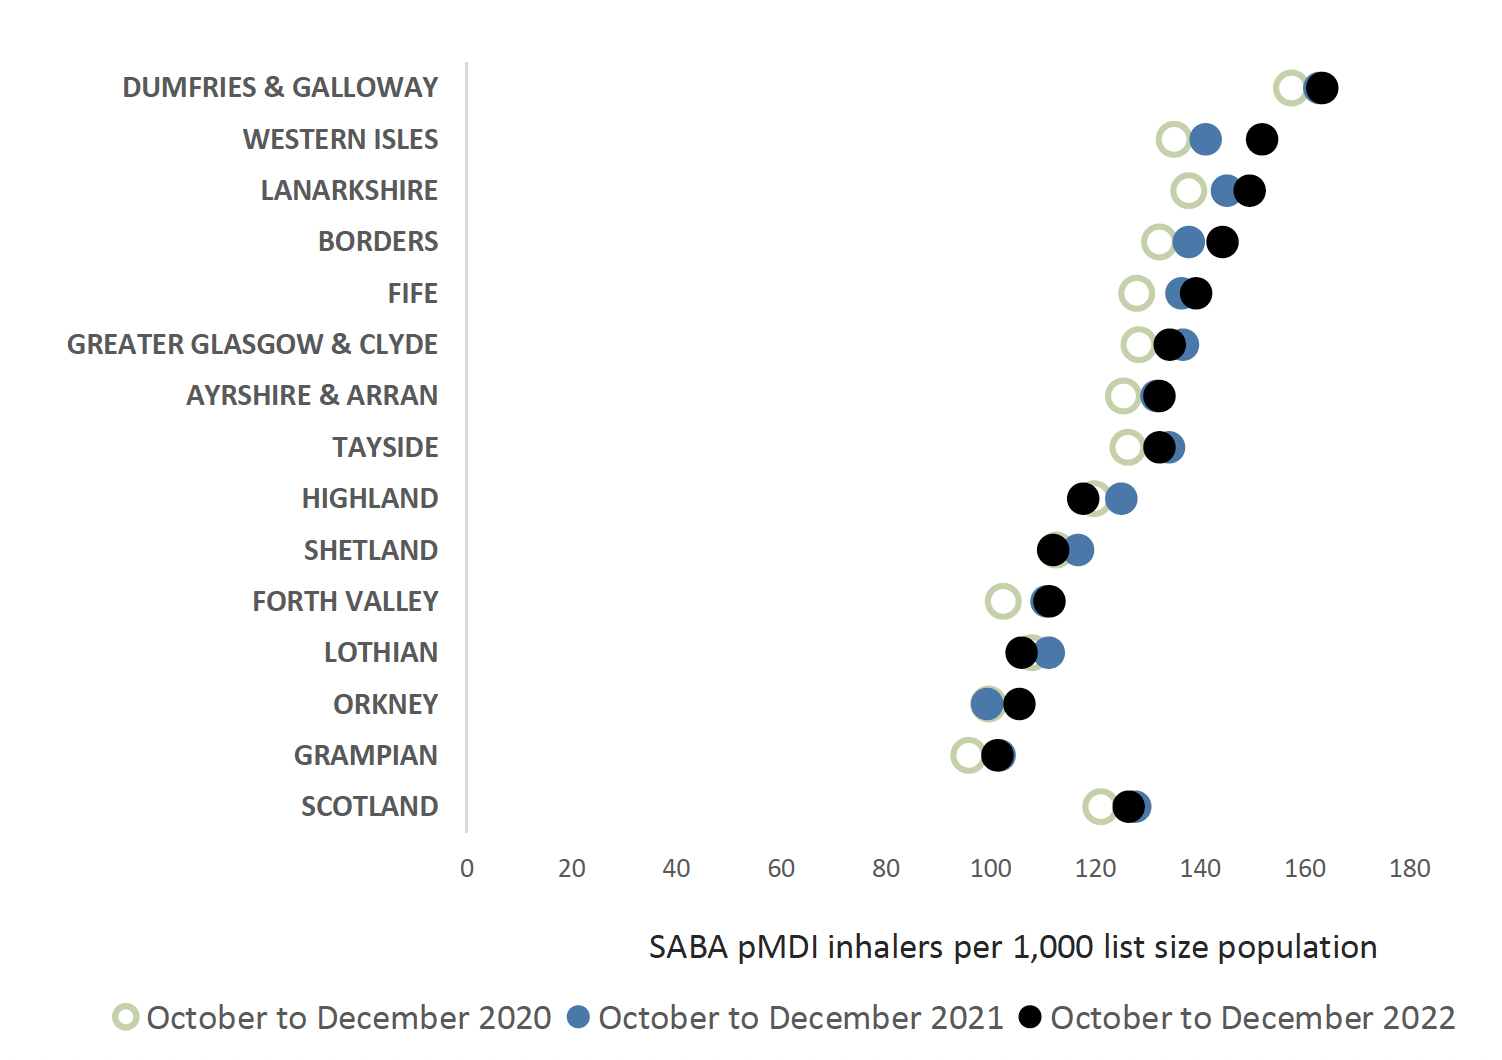 Chart showing number of SABA pMDI inhalers prescribed per 1,000 list size compared between health boards and Scotland in 2020, 2021 and 2022. Overall Scotland trend is increasing